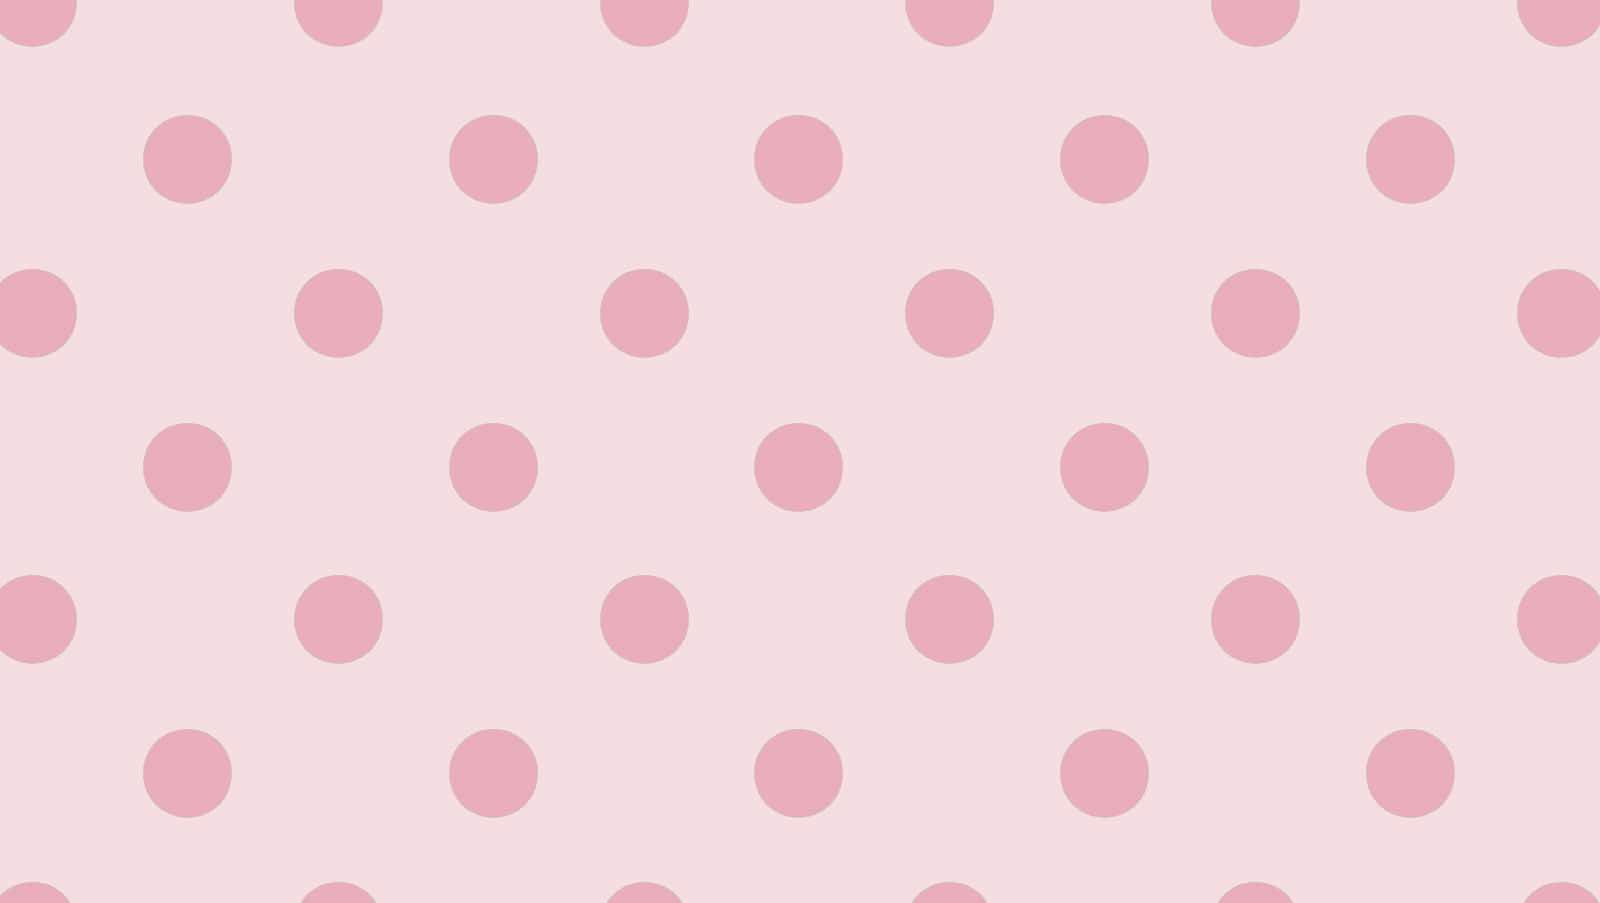 A beautiful pattern of pink and white polka dots. Wallpaper